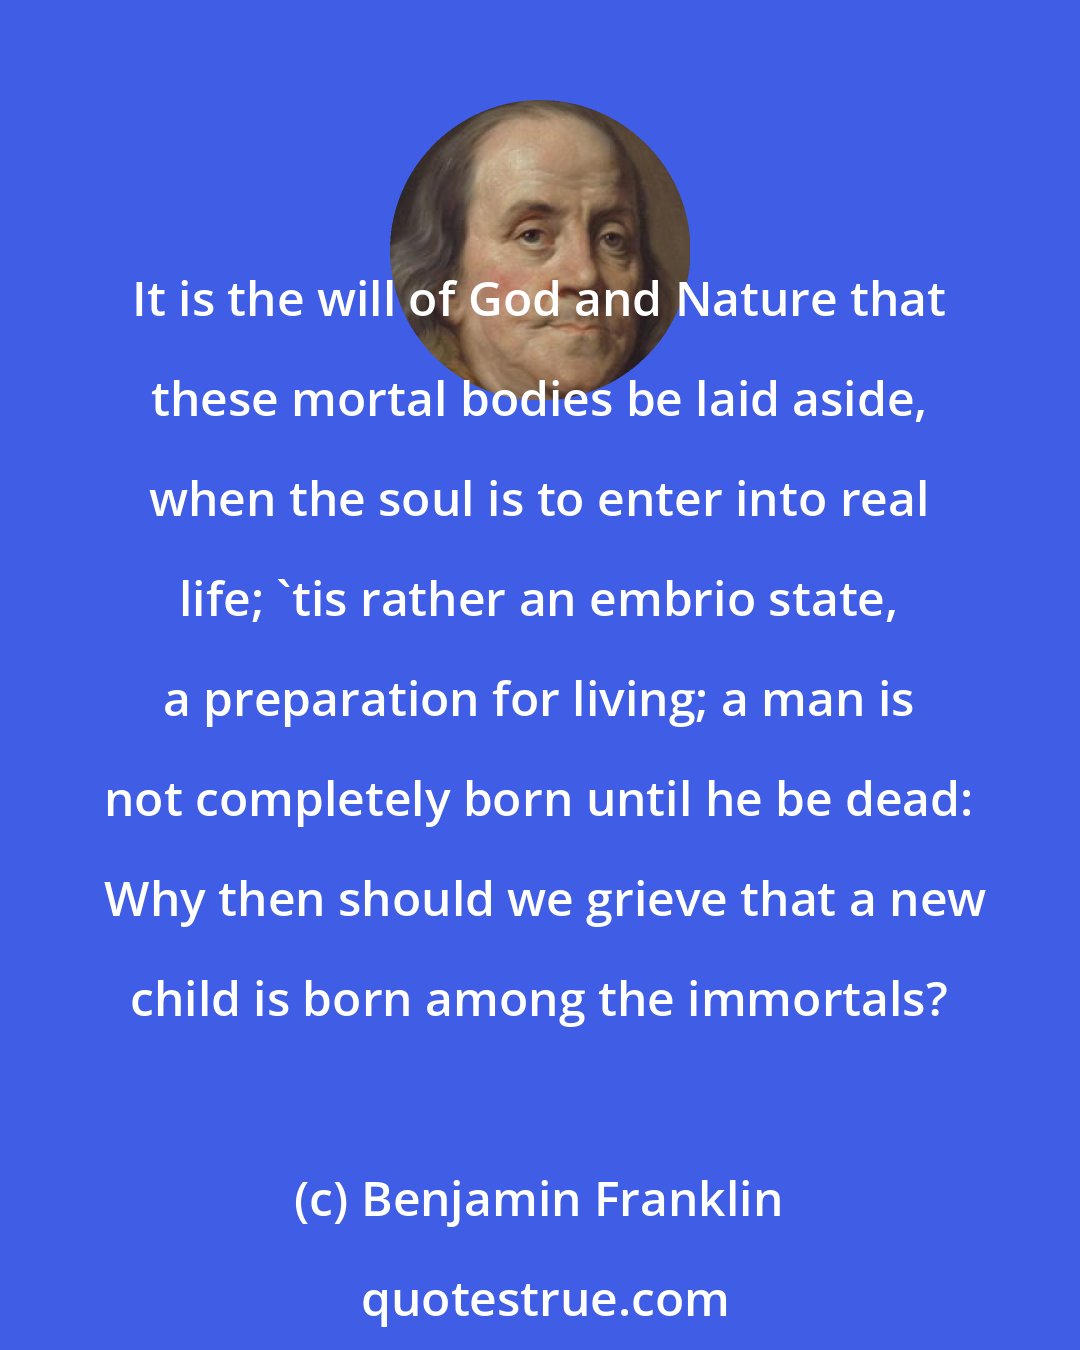 Benjamin Franklin: It is the will of God and Nature that these mortal bodies be laid aside, when the soul is to enter into real life; 'tis rather an embrio state, a preparation for living; a man is not completely born until he be dead:  Why then should we grieve that a new child is born among the immortals?